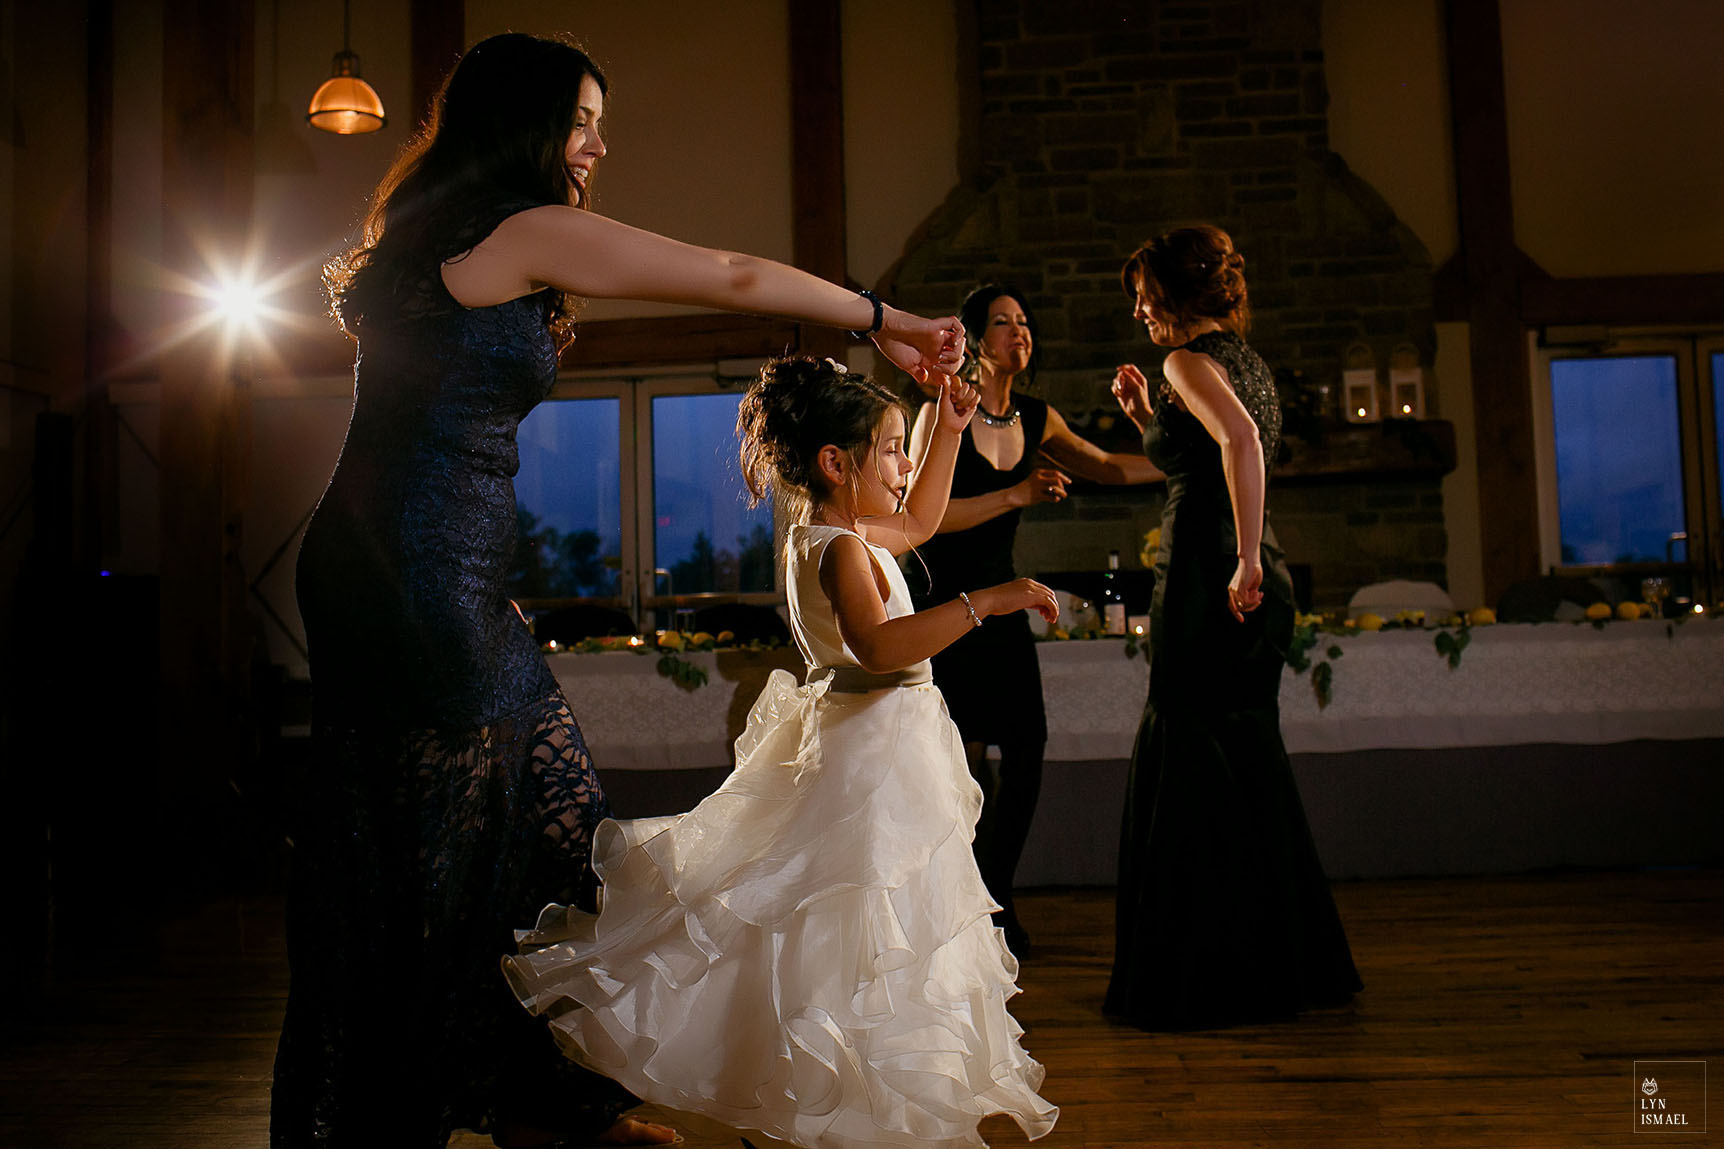 Flower girl dances with her mother at a wedding reception in Grey Silo